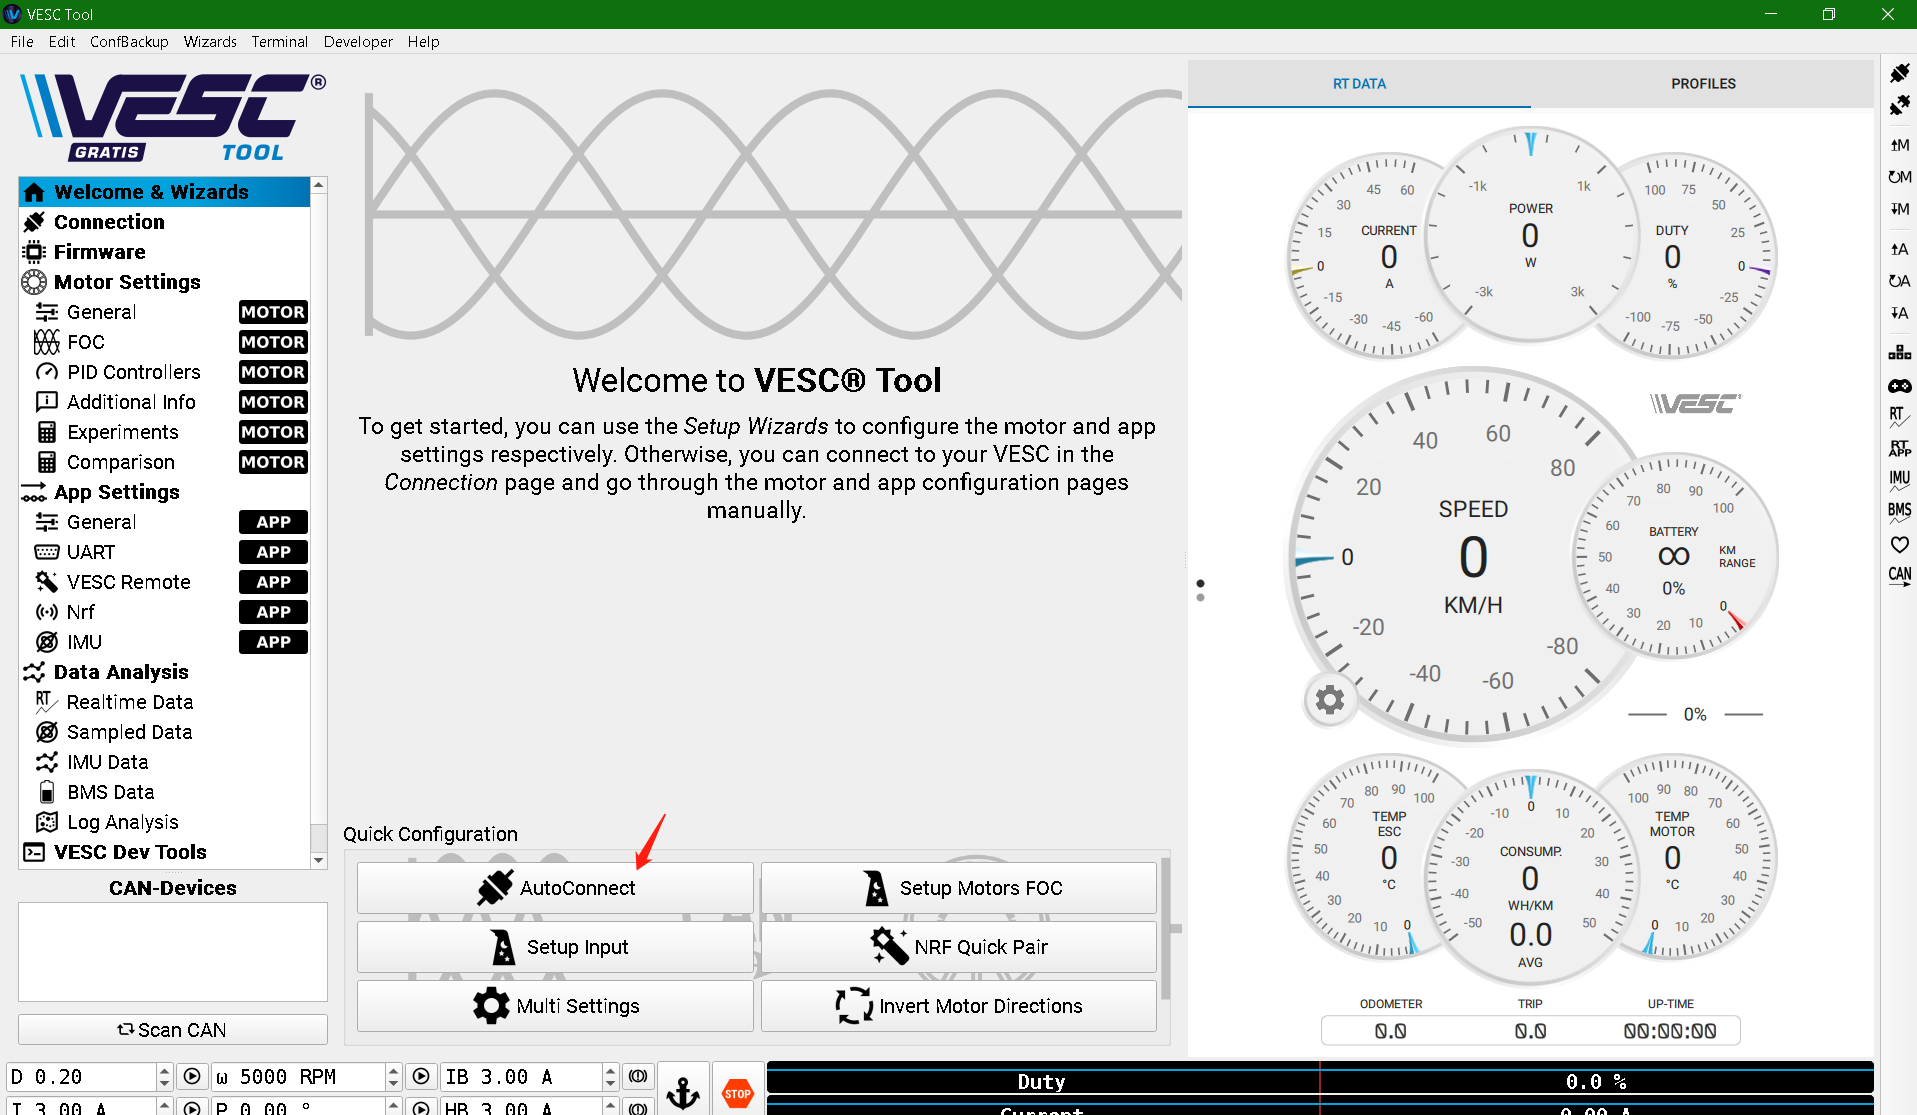 Update firmware : step1 connect in vesc tool